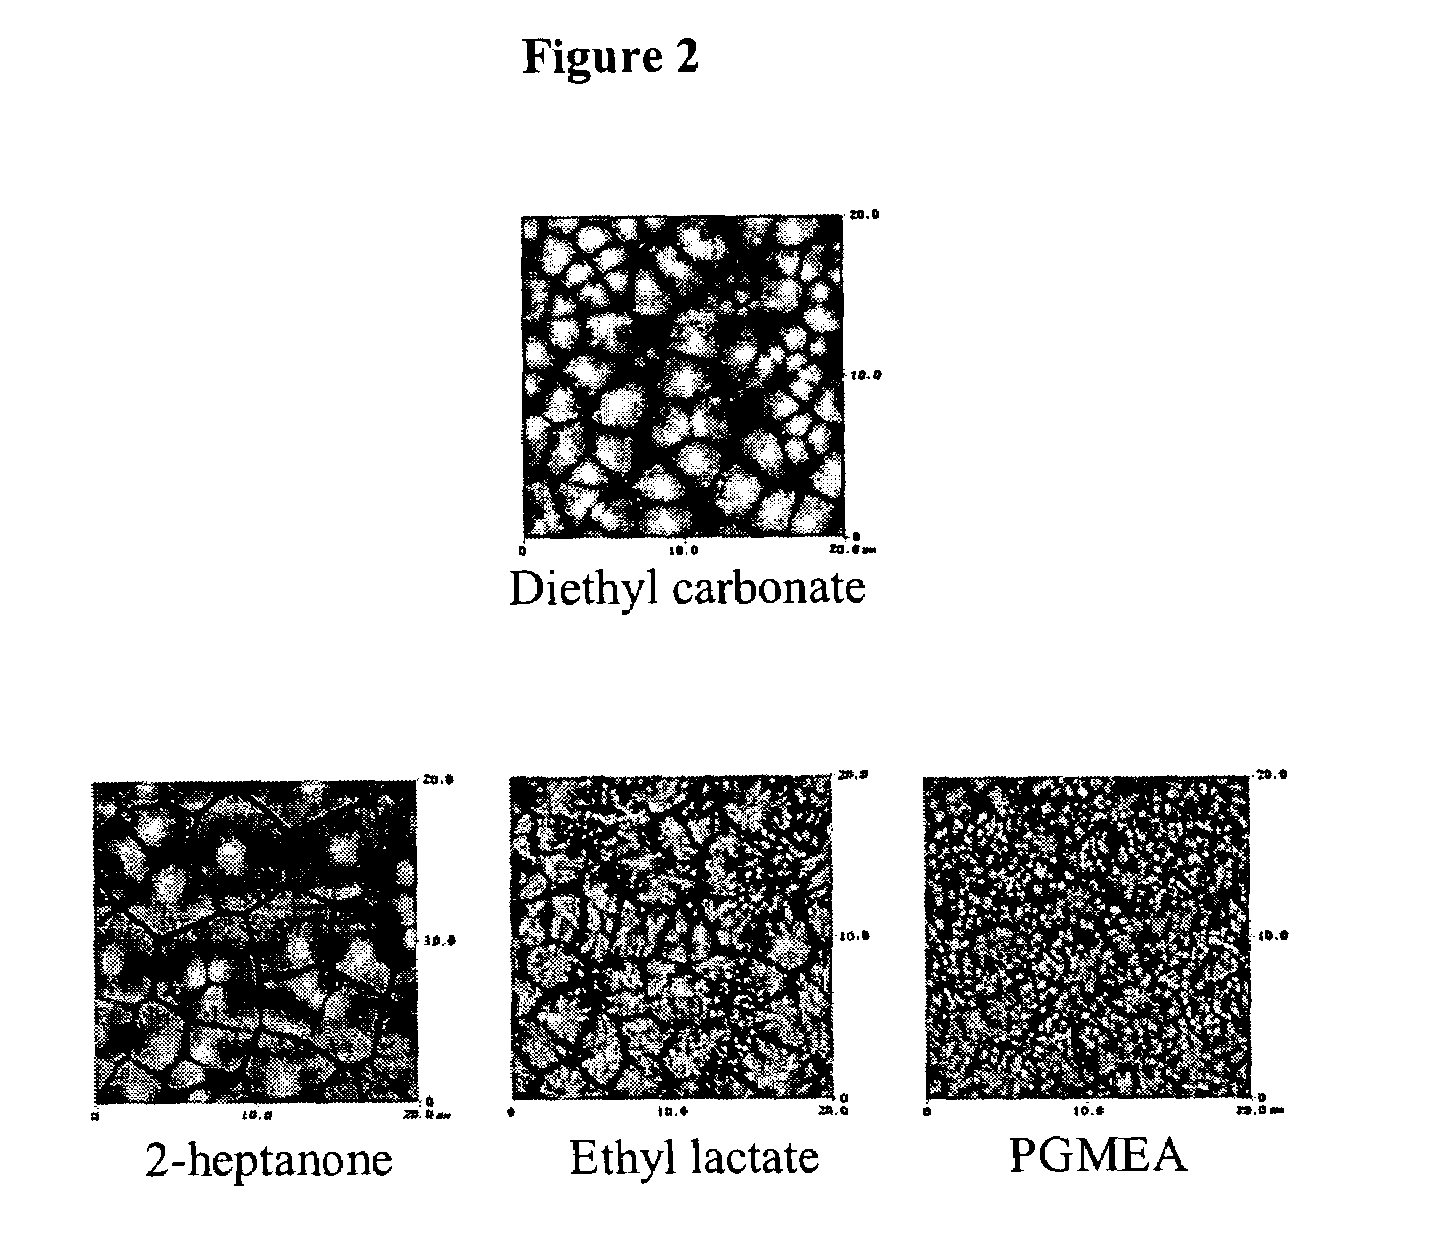 Process for selecting solvents for forming films of ferroelectric polymers